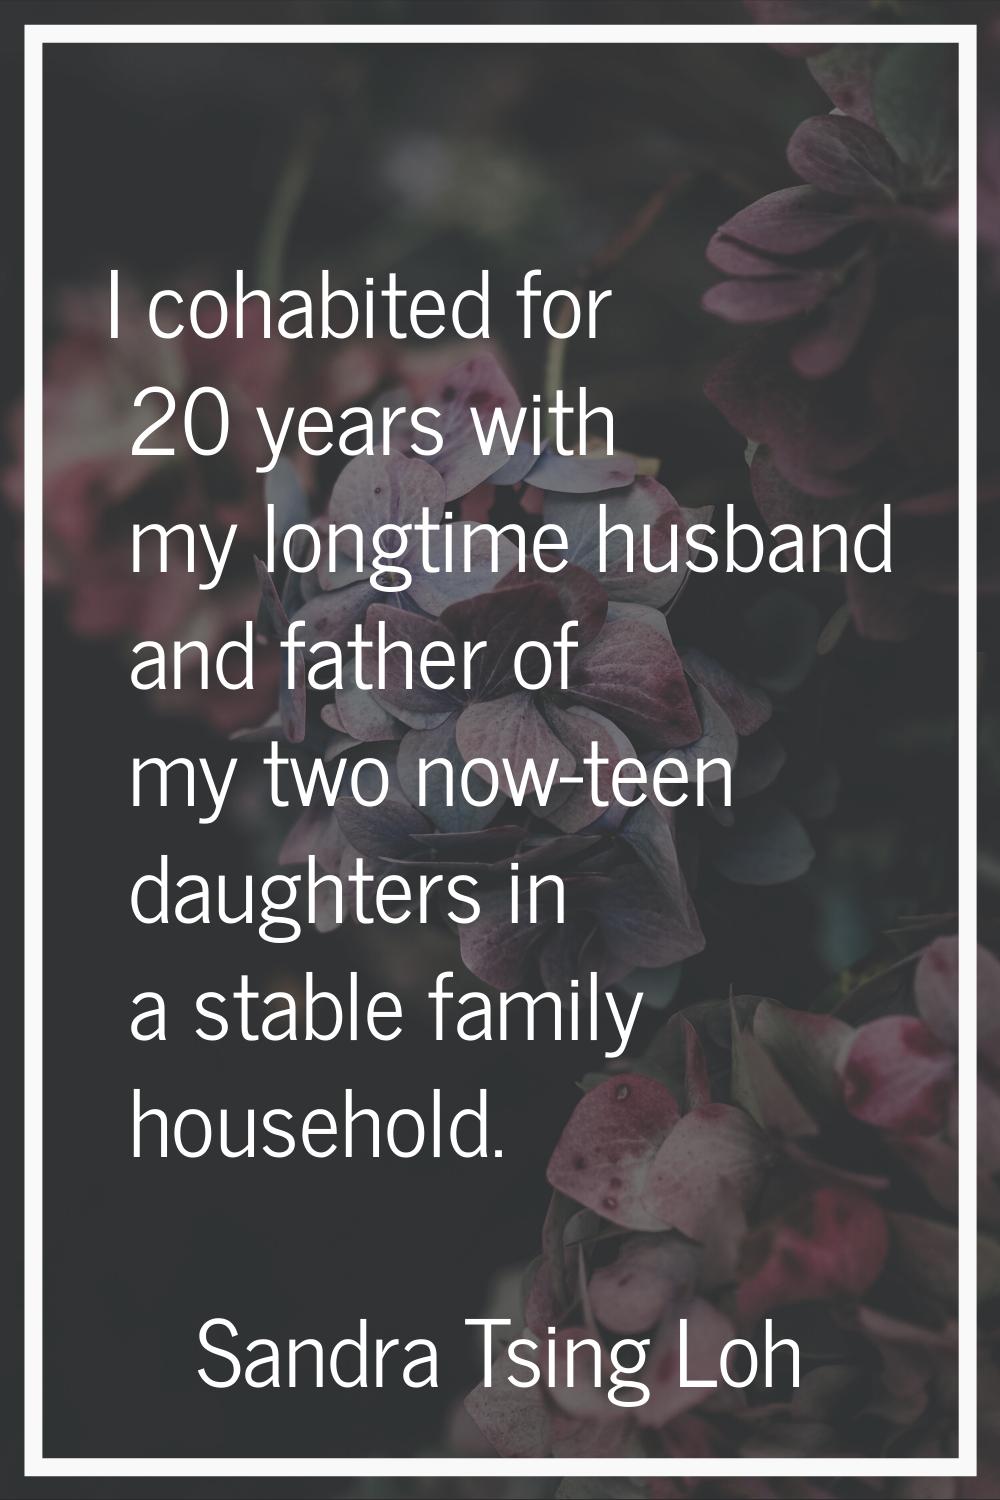 I cohabited for 20 years with my longtime husband and father of my two now-teen daughters in a stab